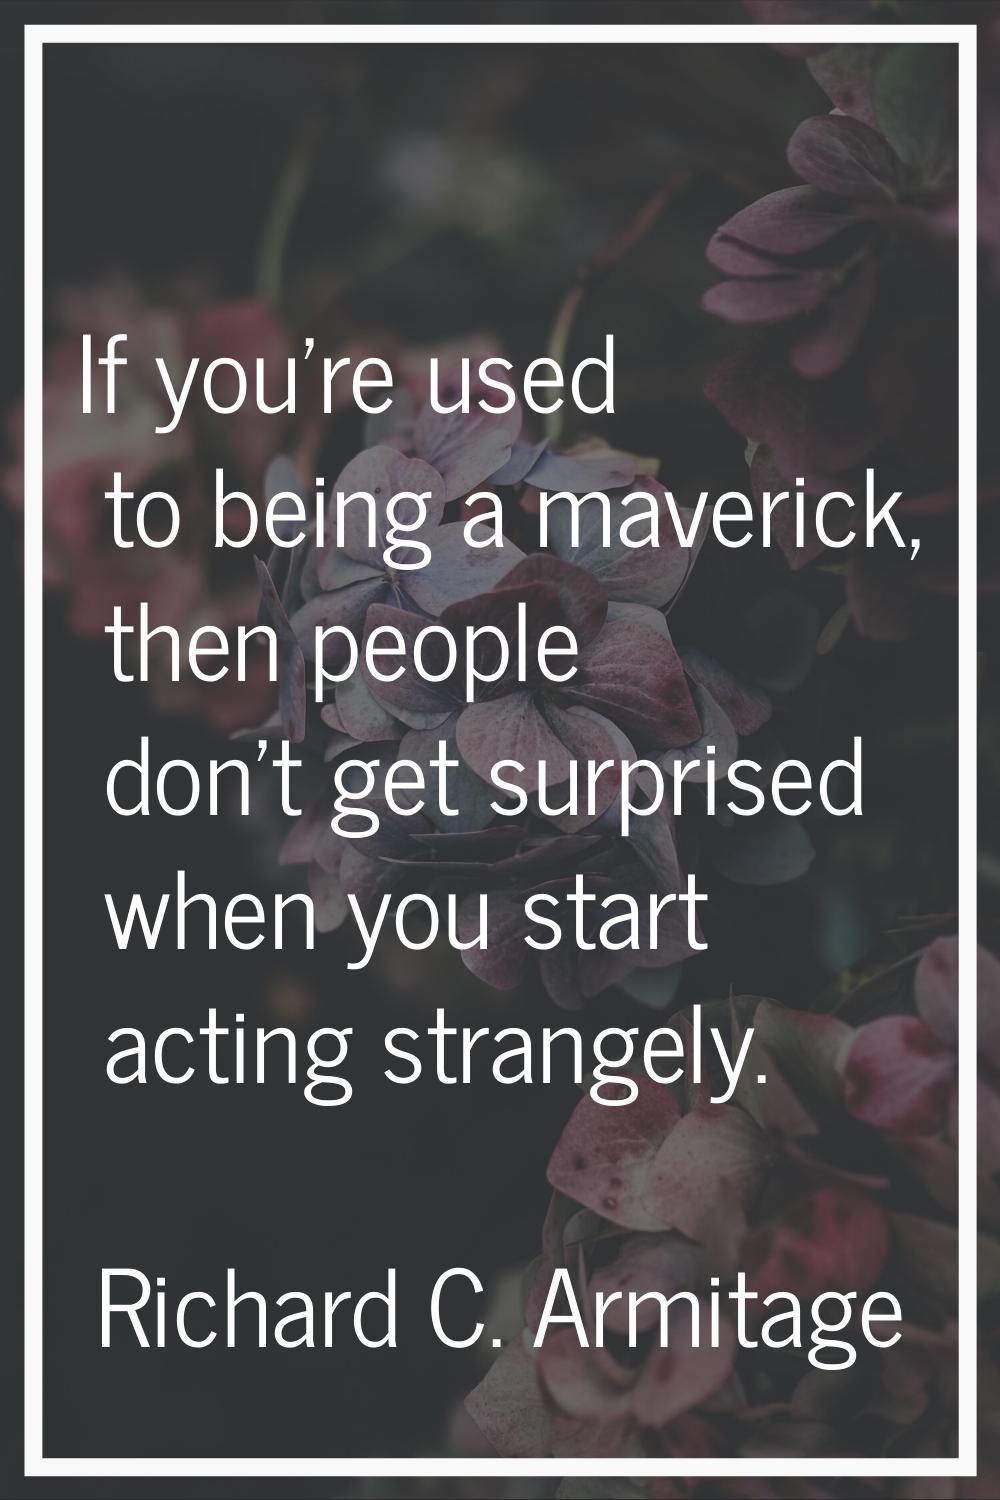 If you're used to being a maverick, then people don't get surprised when you start acting strangely